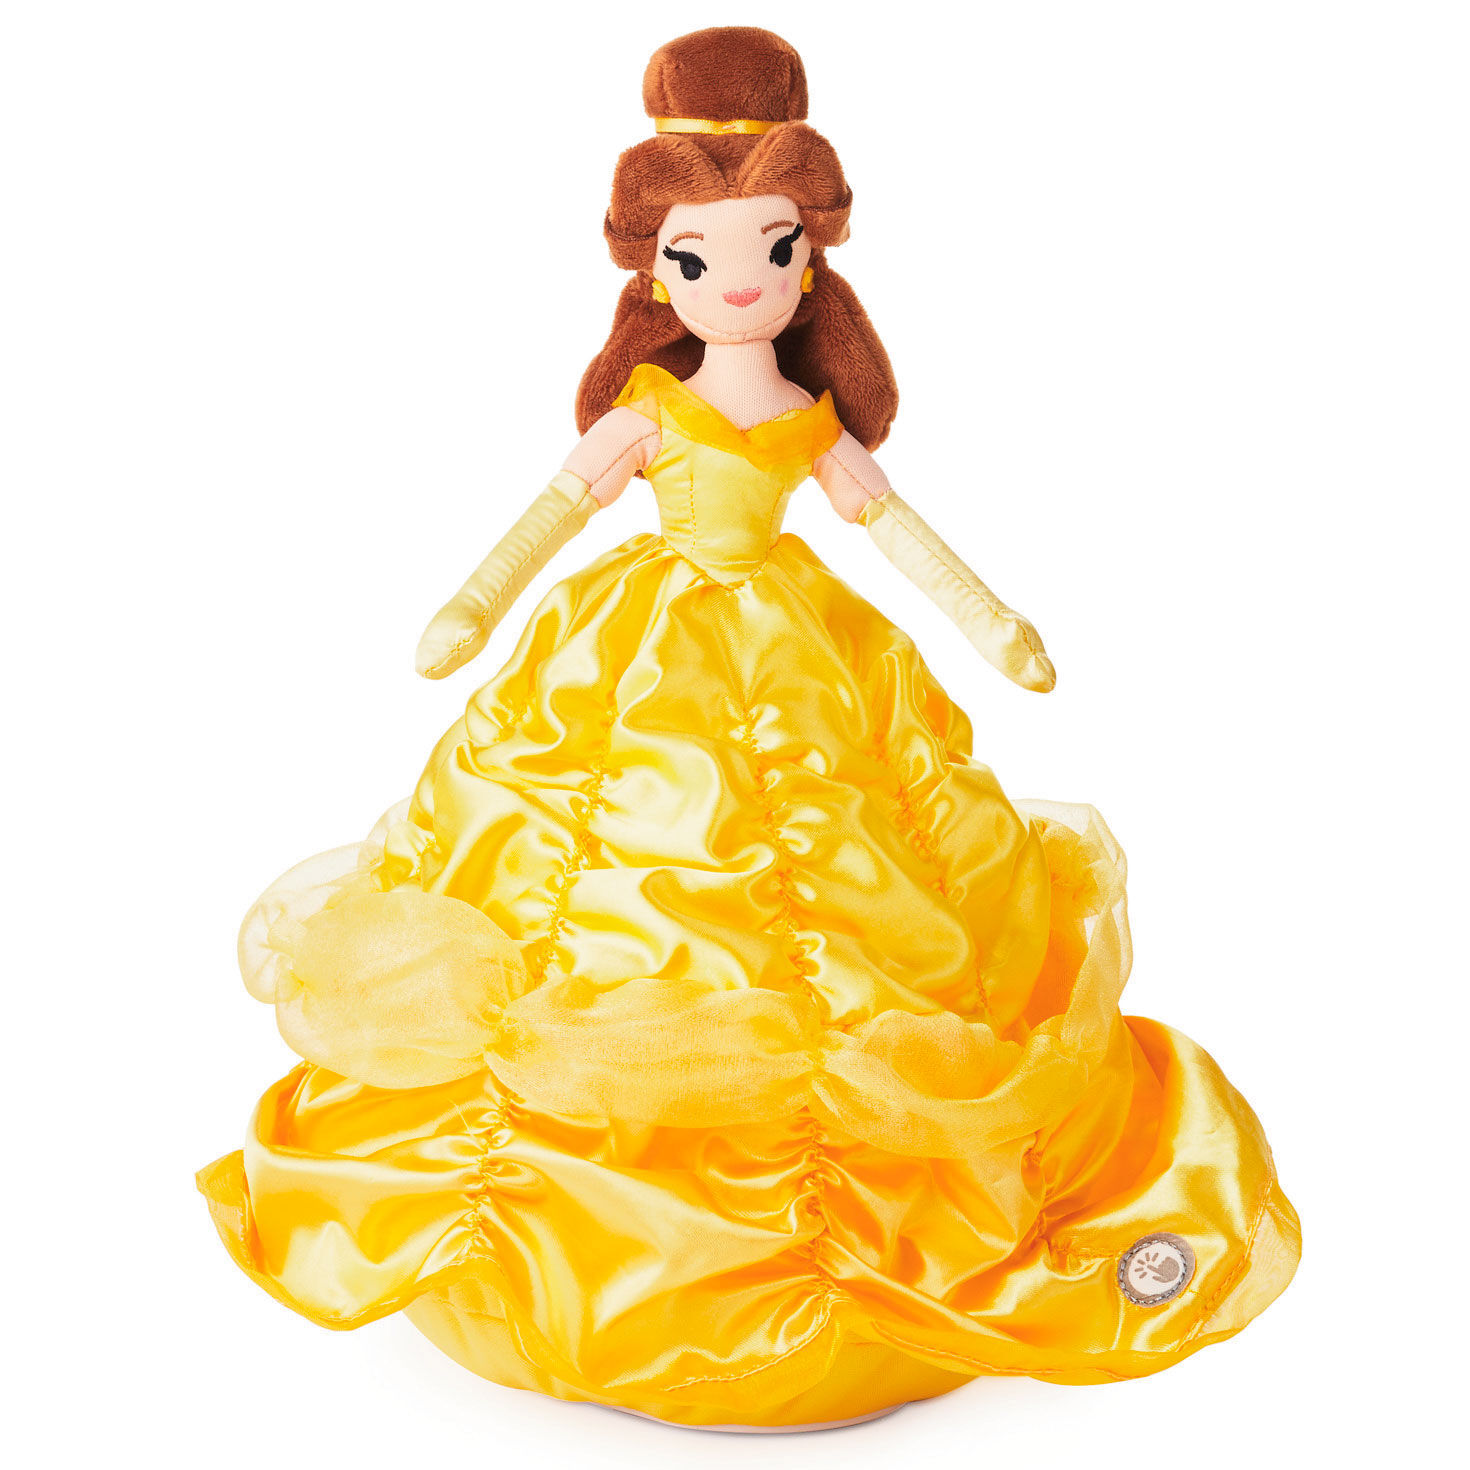 HALLMARK ITTY BITTYS BELLE New with Tag SECOND in SERIES Disney Princess